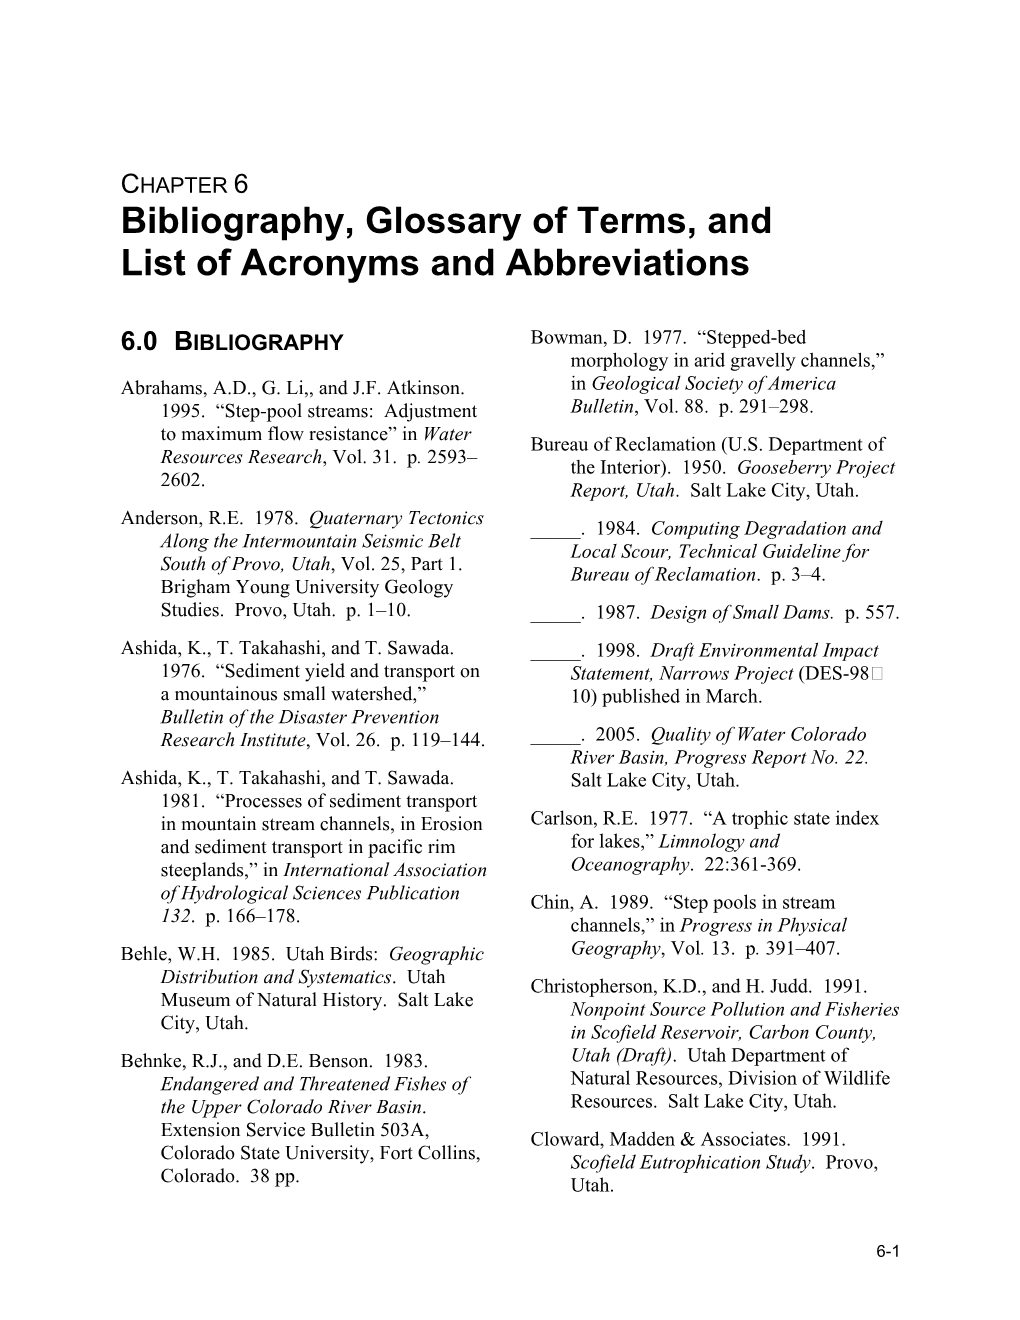 Bibliography, Glossary of Terms, and List of Acronyms and Abbreviations